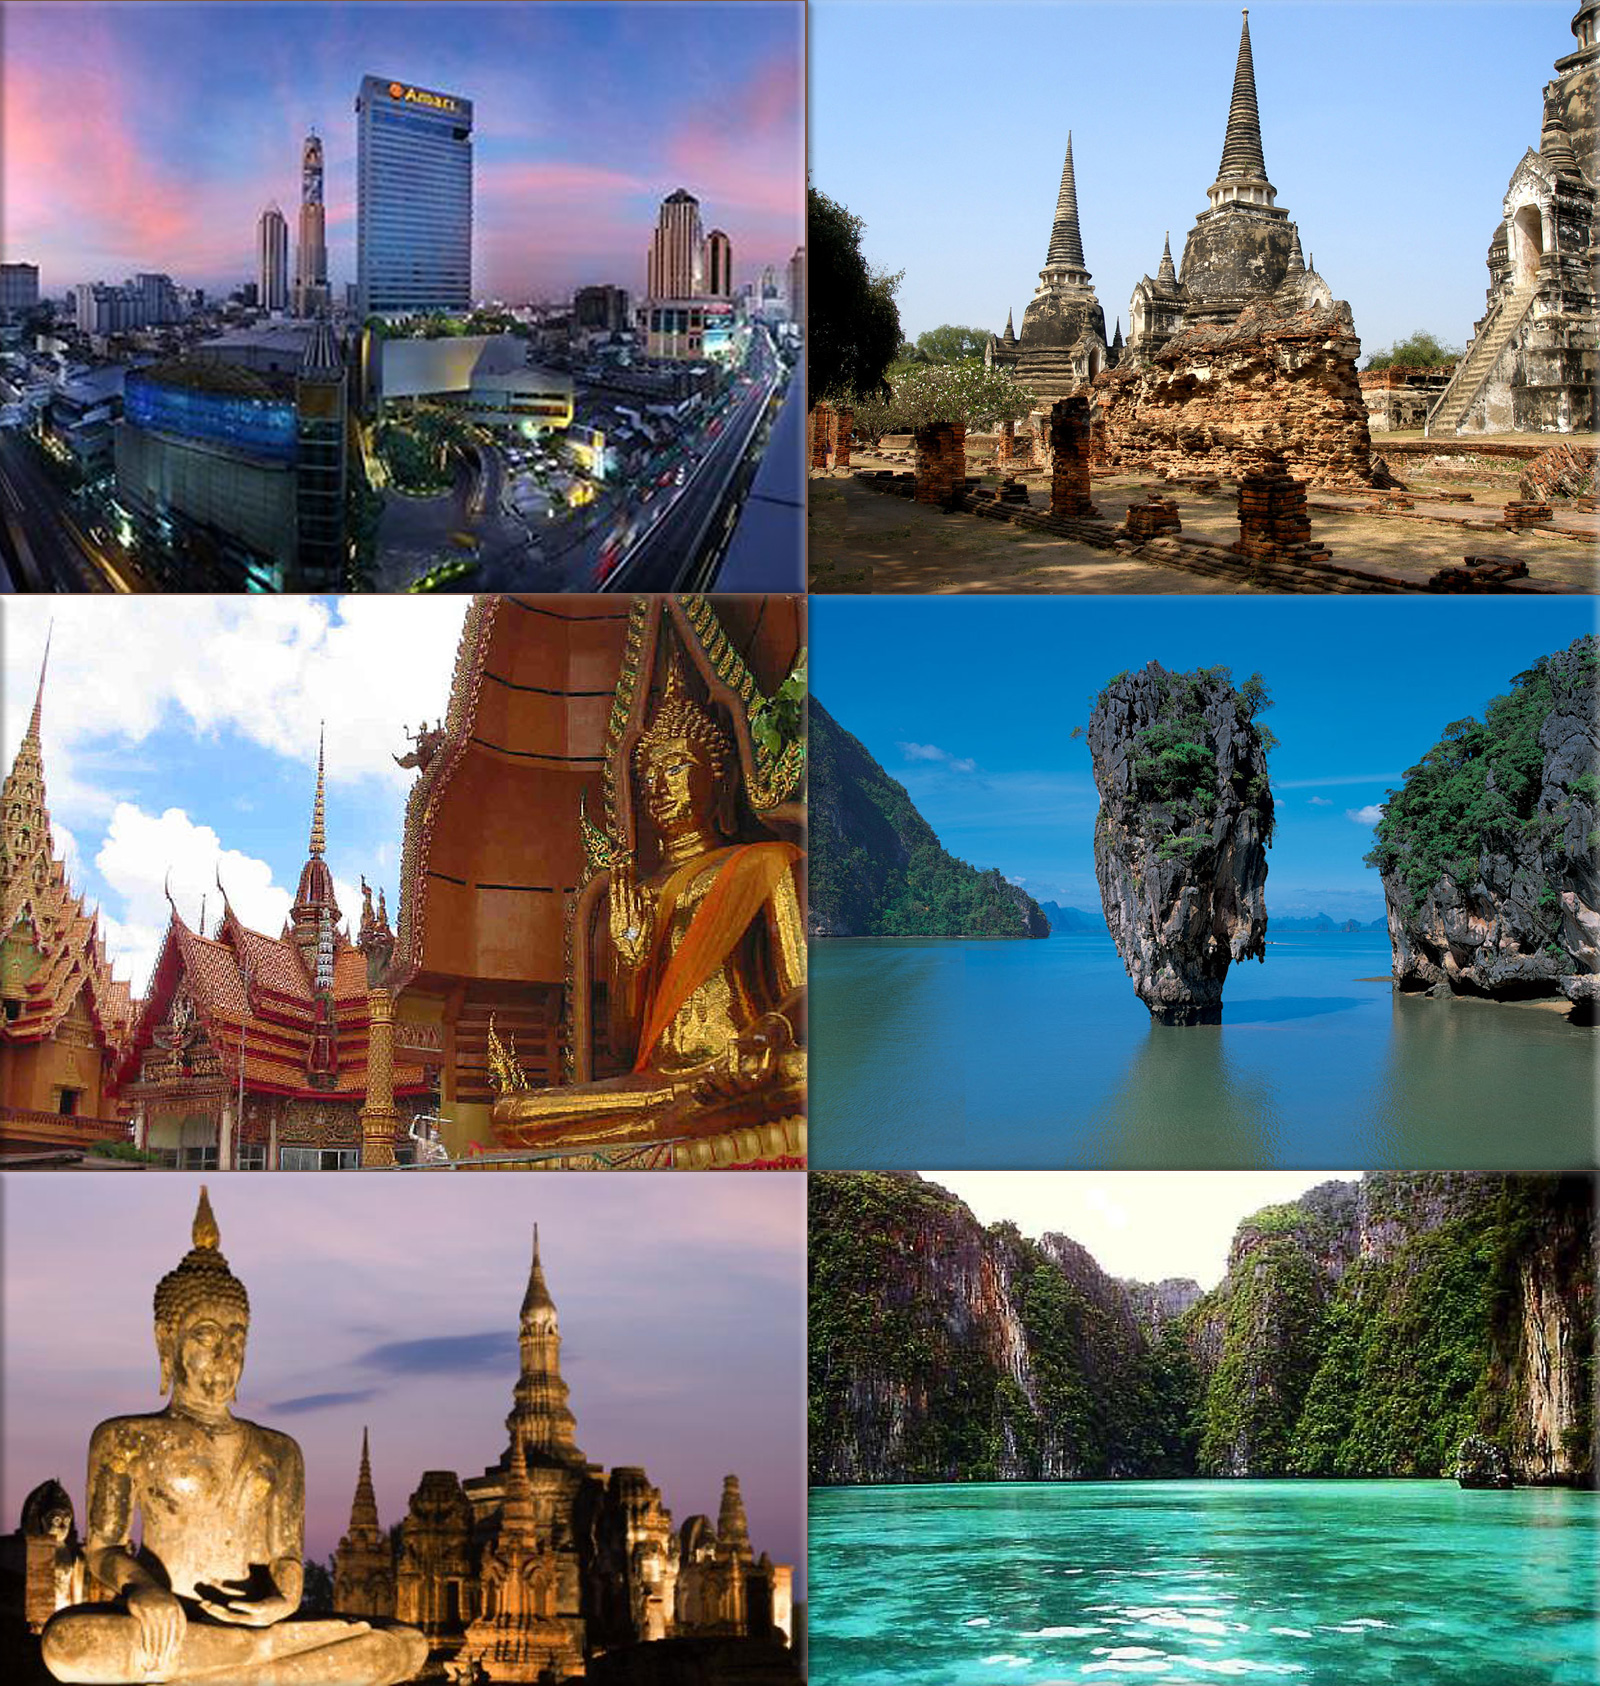 Thailand (officially the Kingdom of Thailand, formerly known as Siam) is a country located at the centre of the Indochina peninsula in Southeast Asia